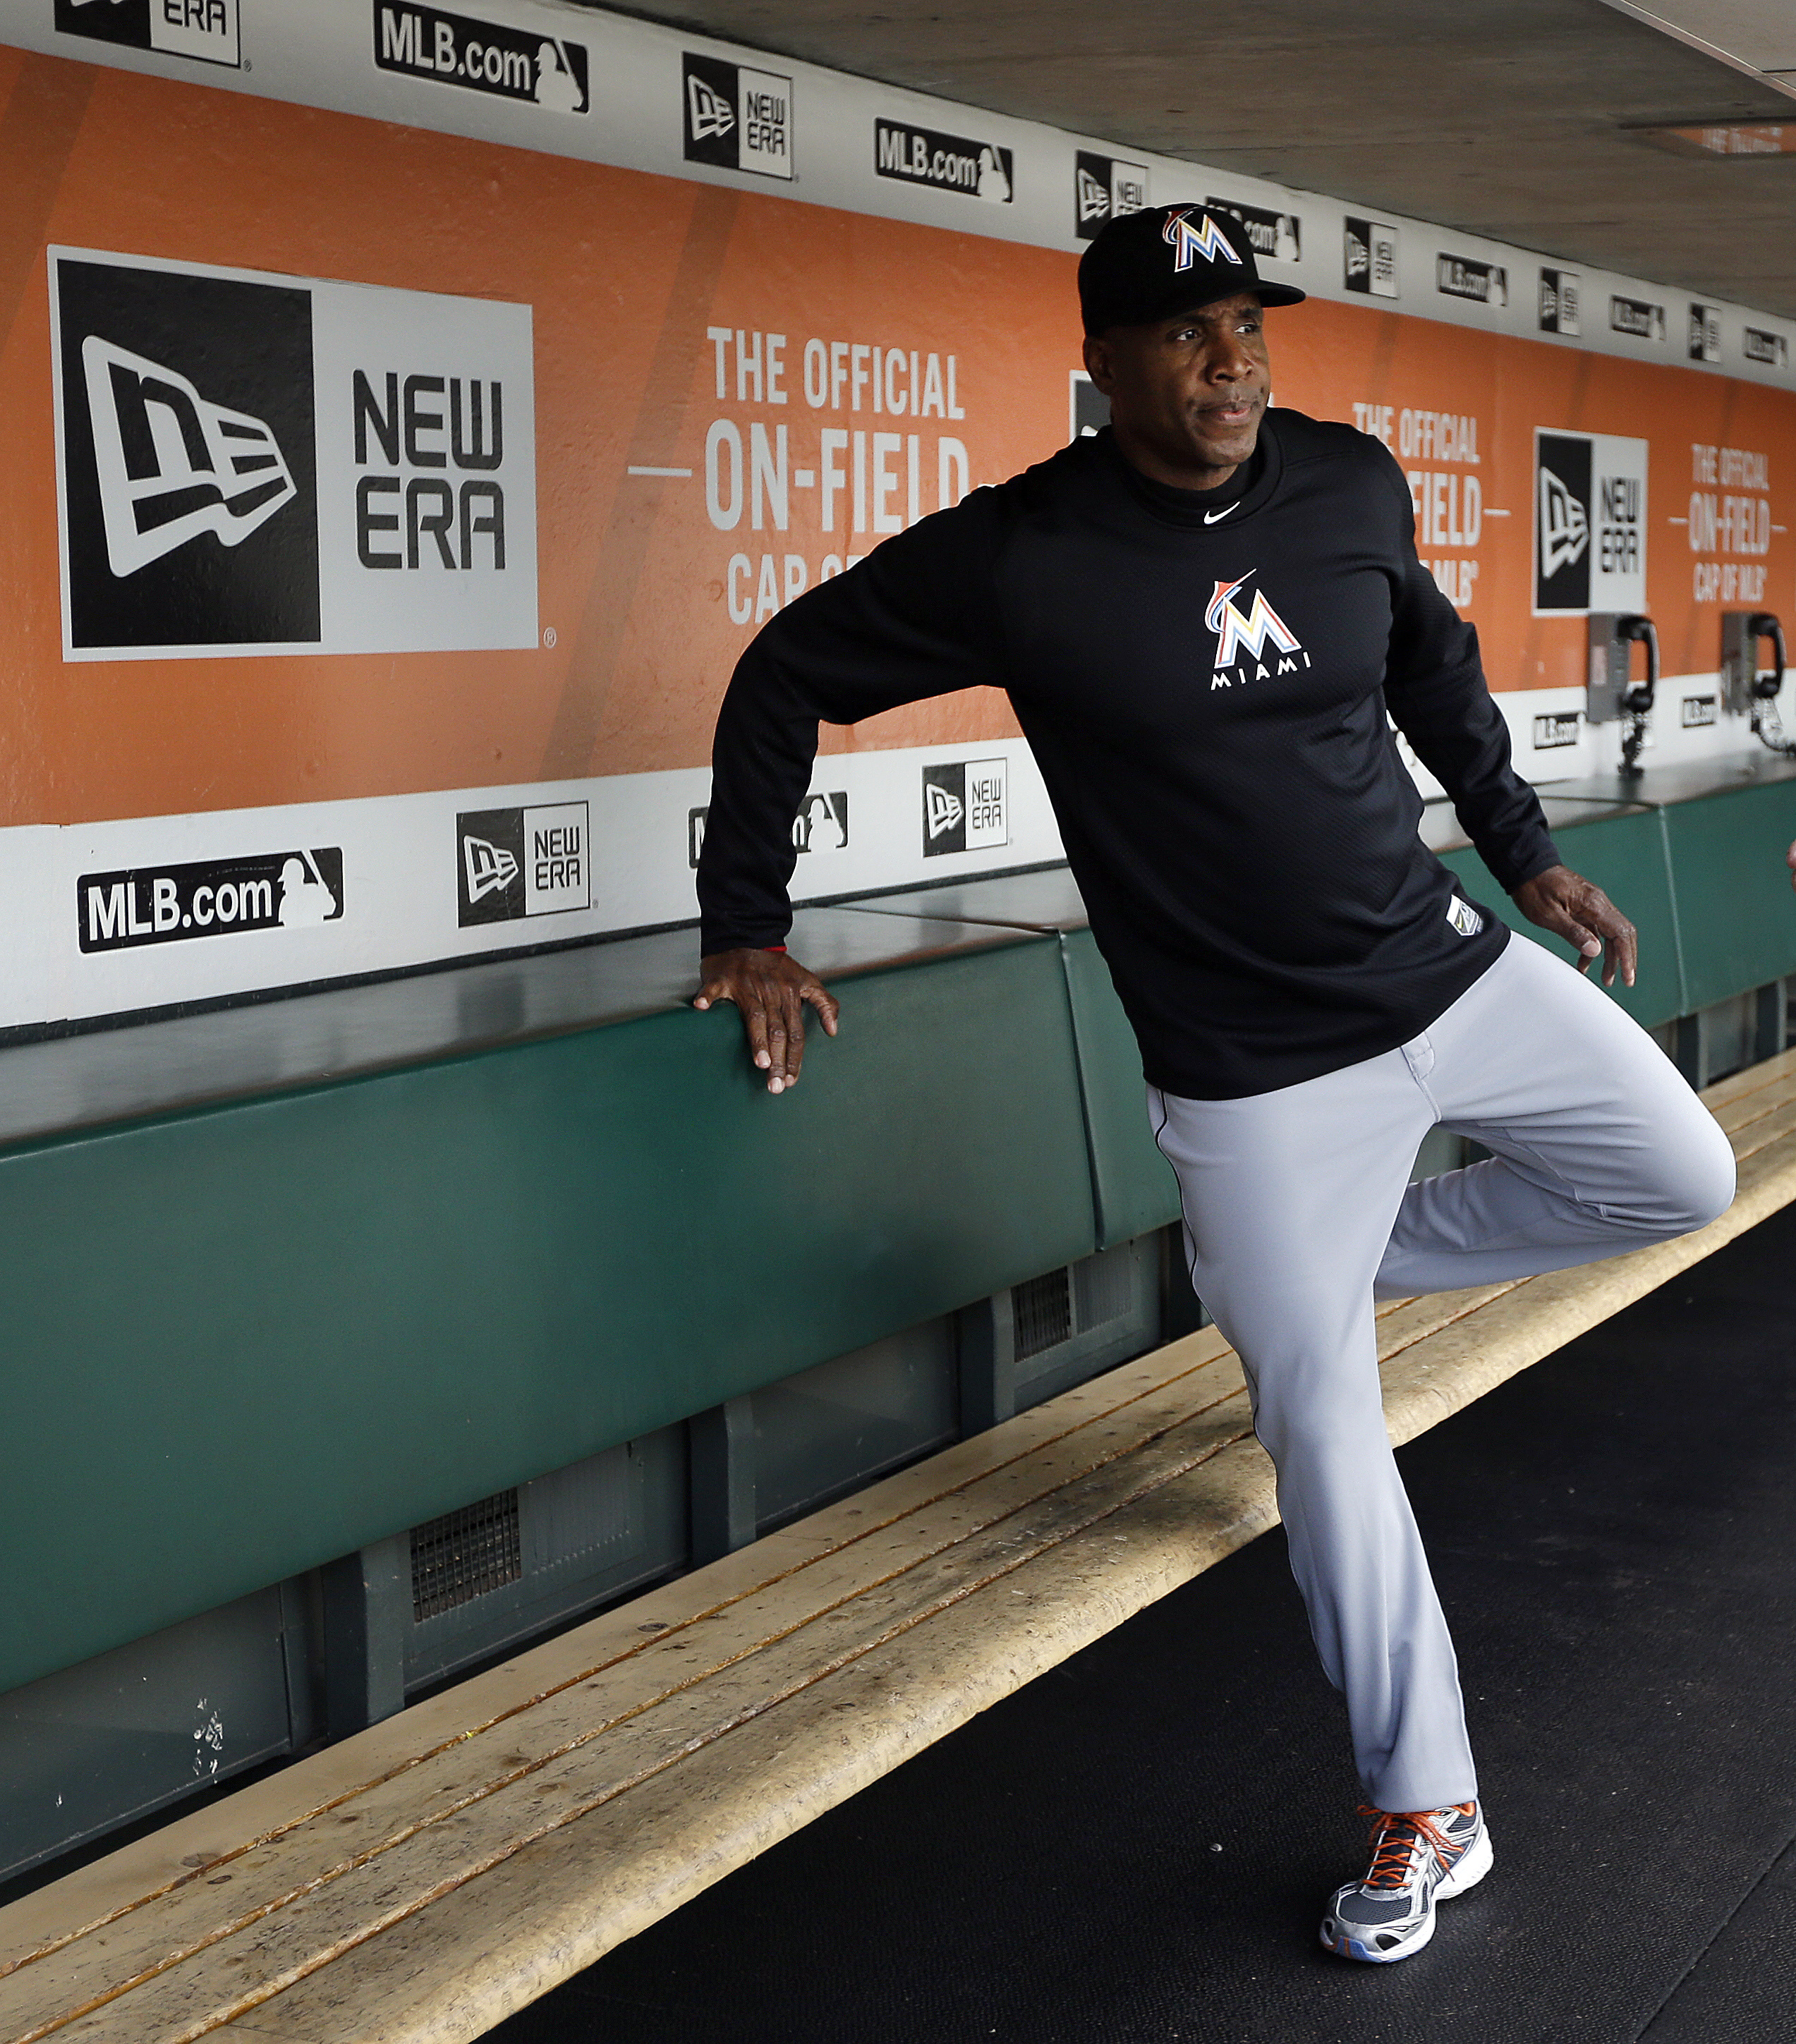 Coach Barry Bonds returns to AT&T Park in a Marlins uniform